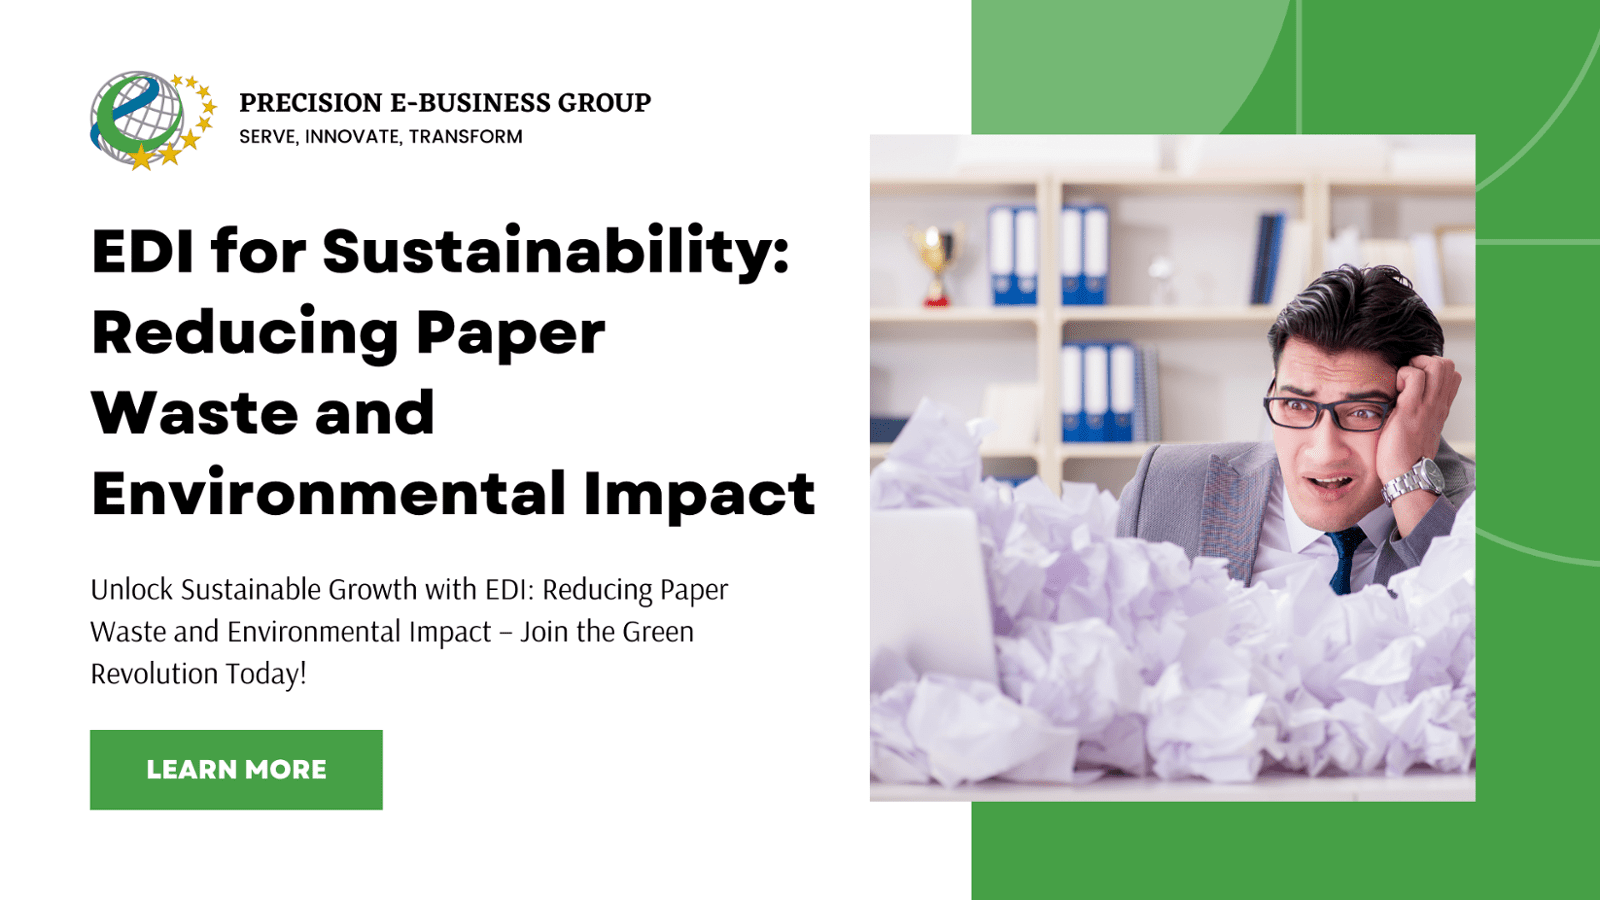 EDI for Sustainability: Reducing Paper Waste and Environmental Impact